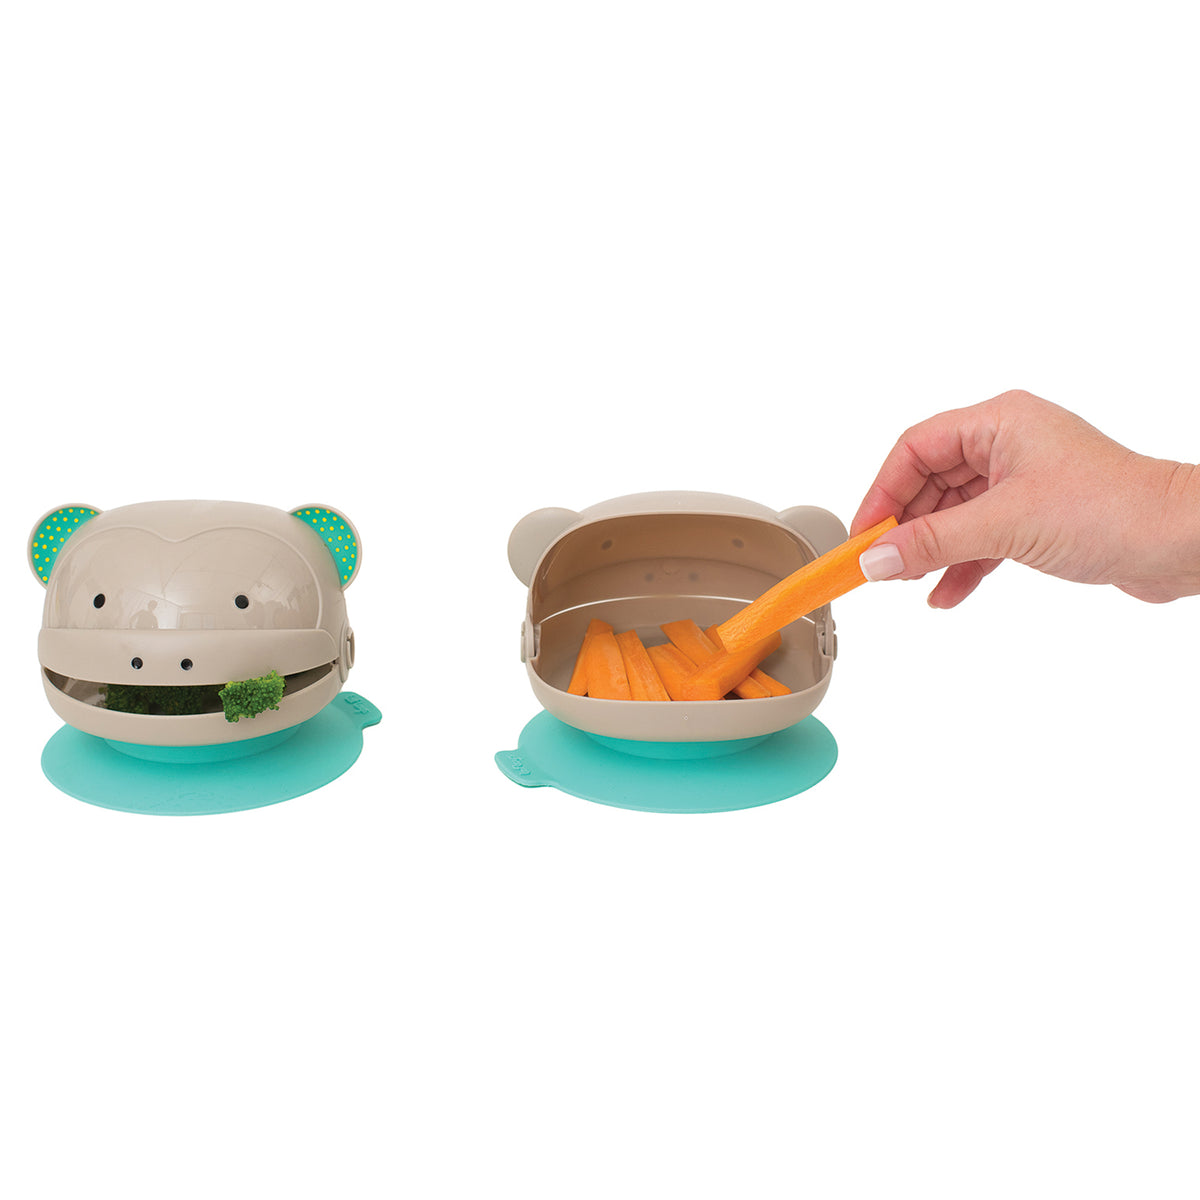 Taf Toys Mealtime Monkey- Hide and Eat